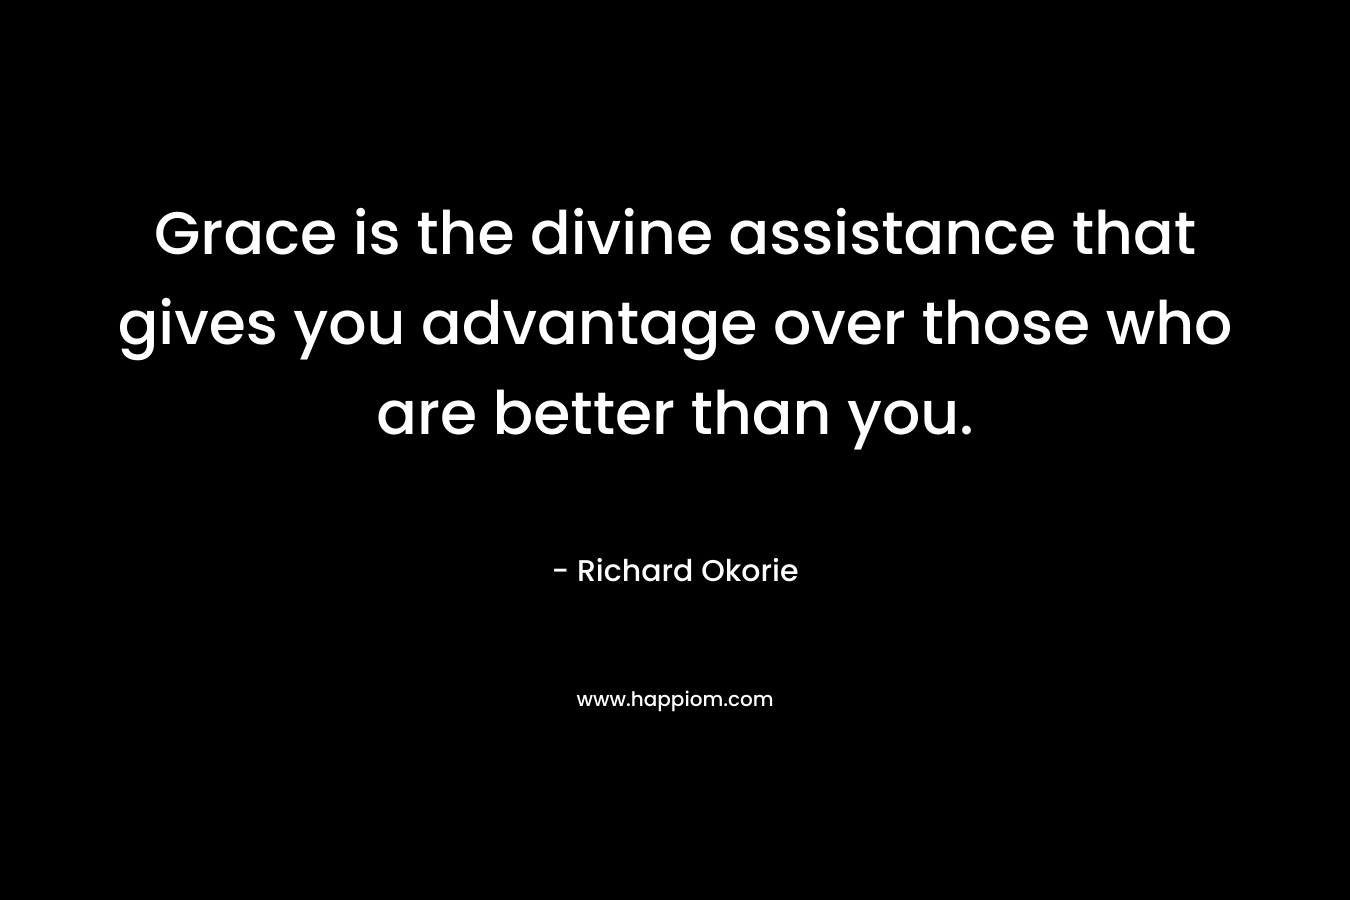 Grace is the divine assistance that gives you advantage over those who are better than you. – Richard Okorie